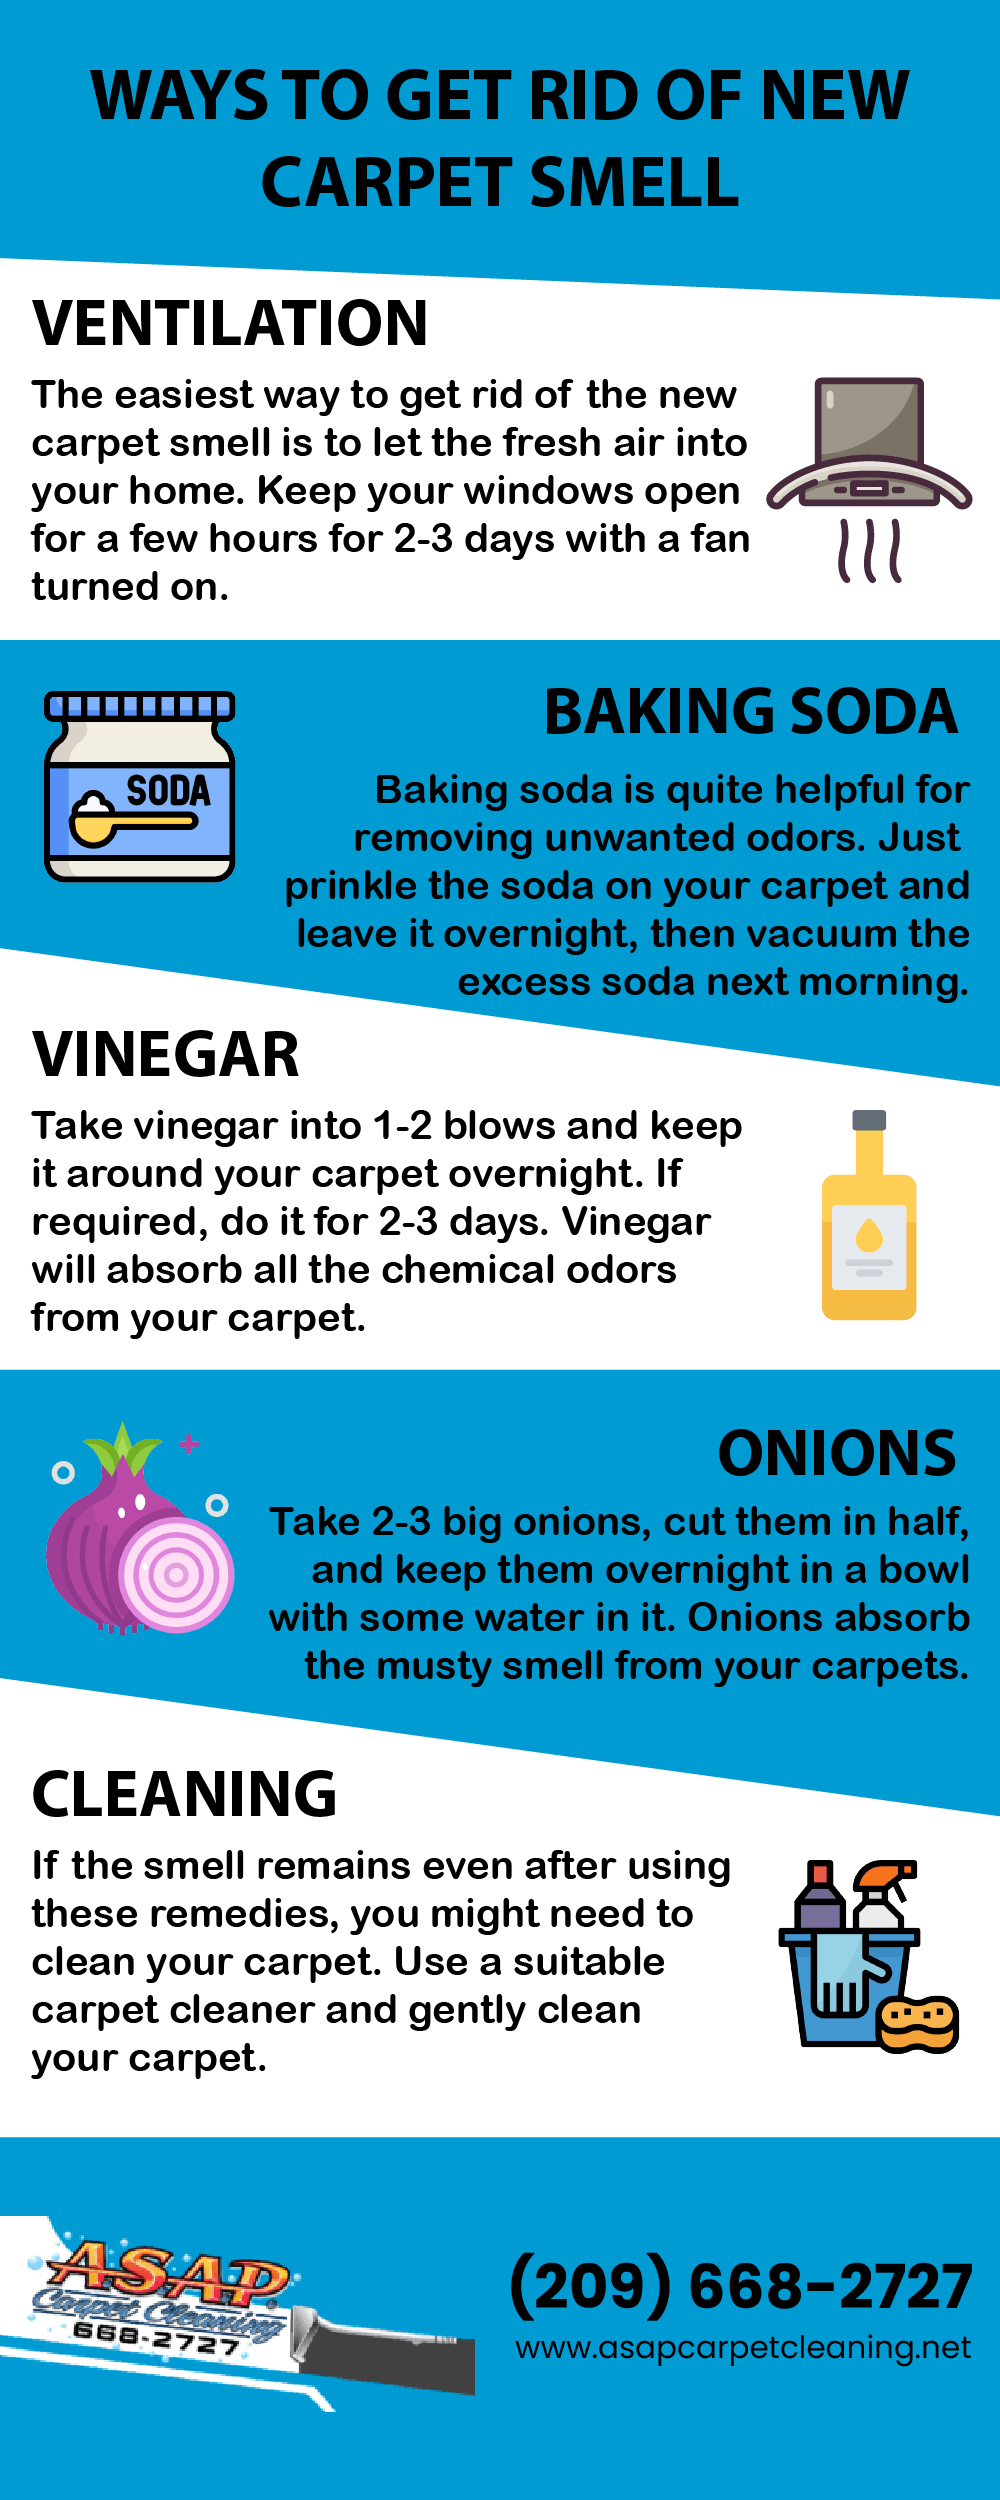 Ways To Get Rid Of New Carpet Smell